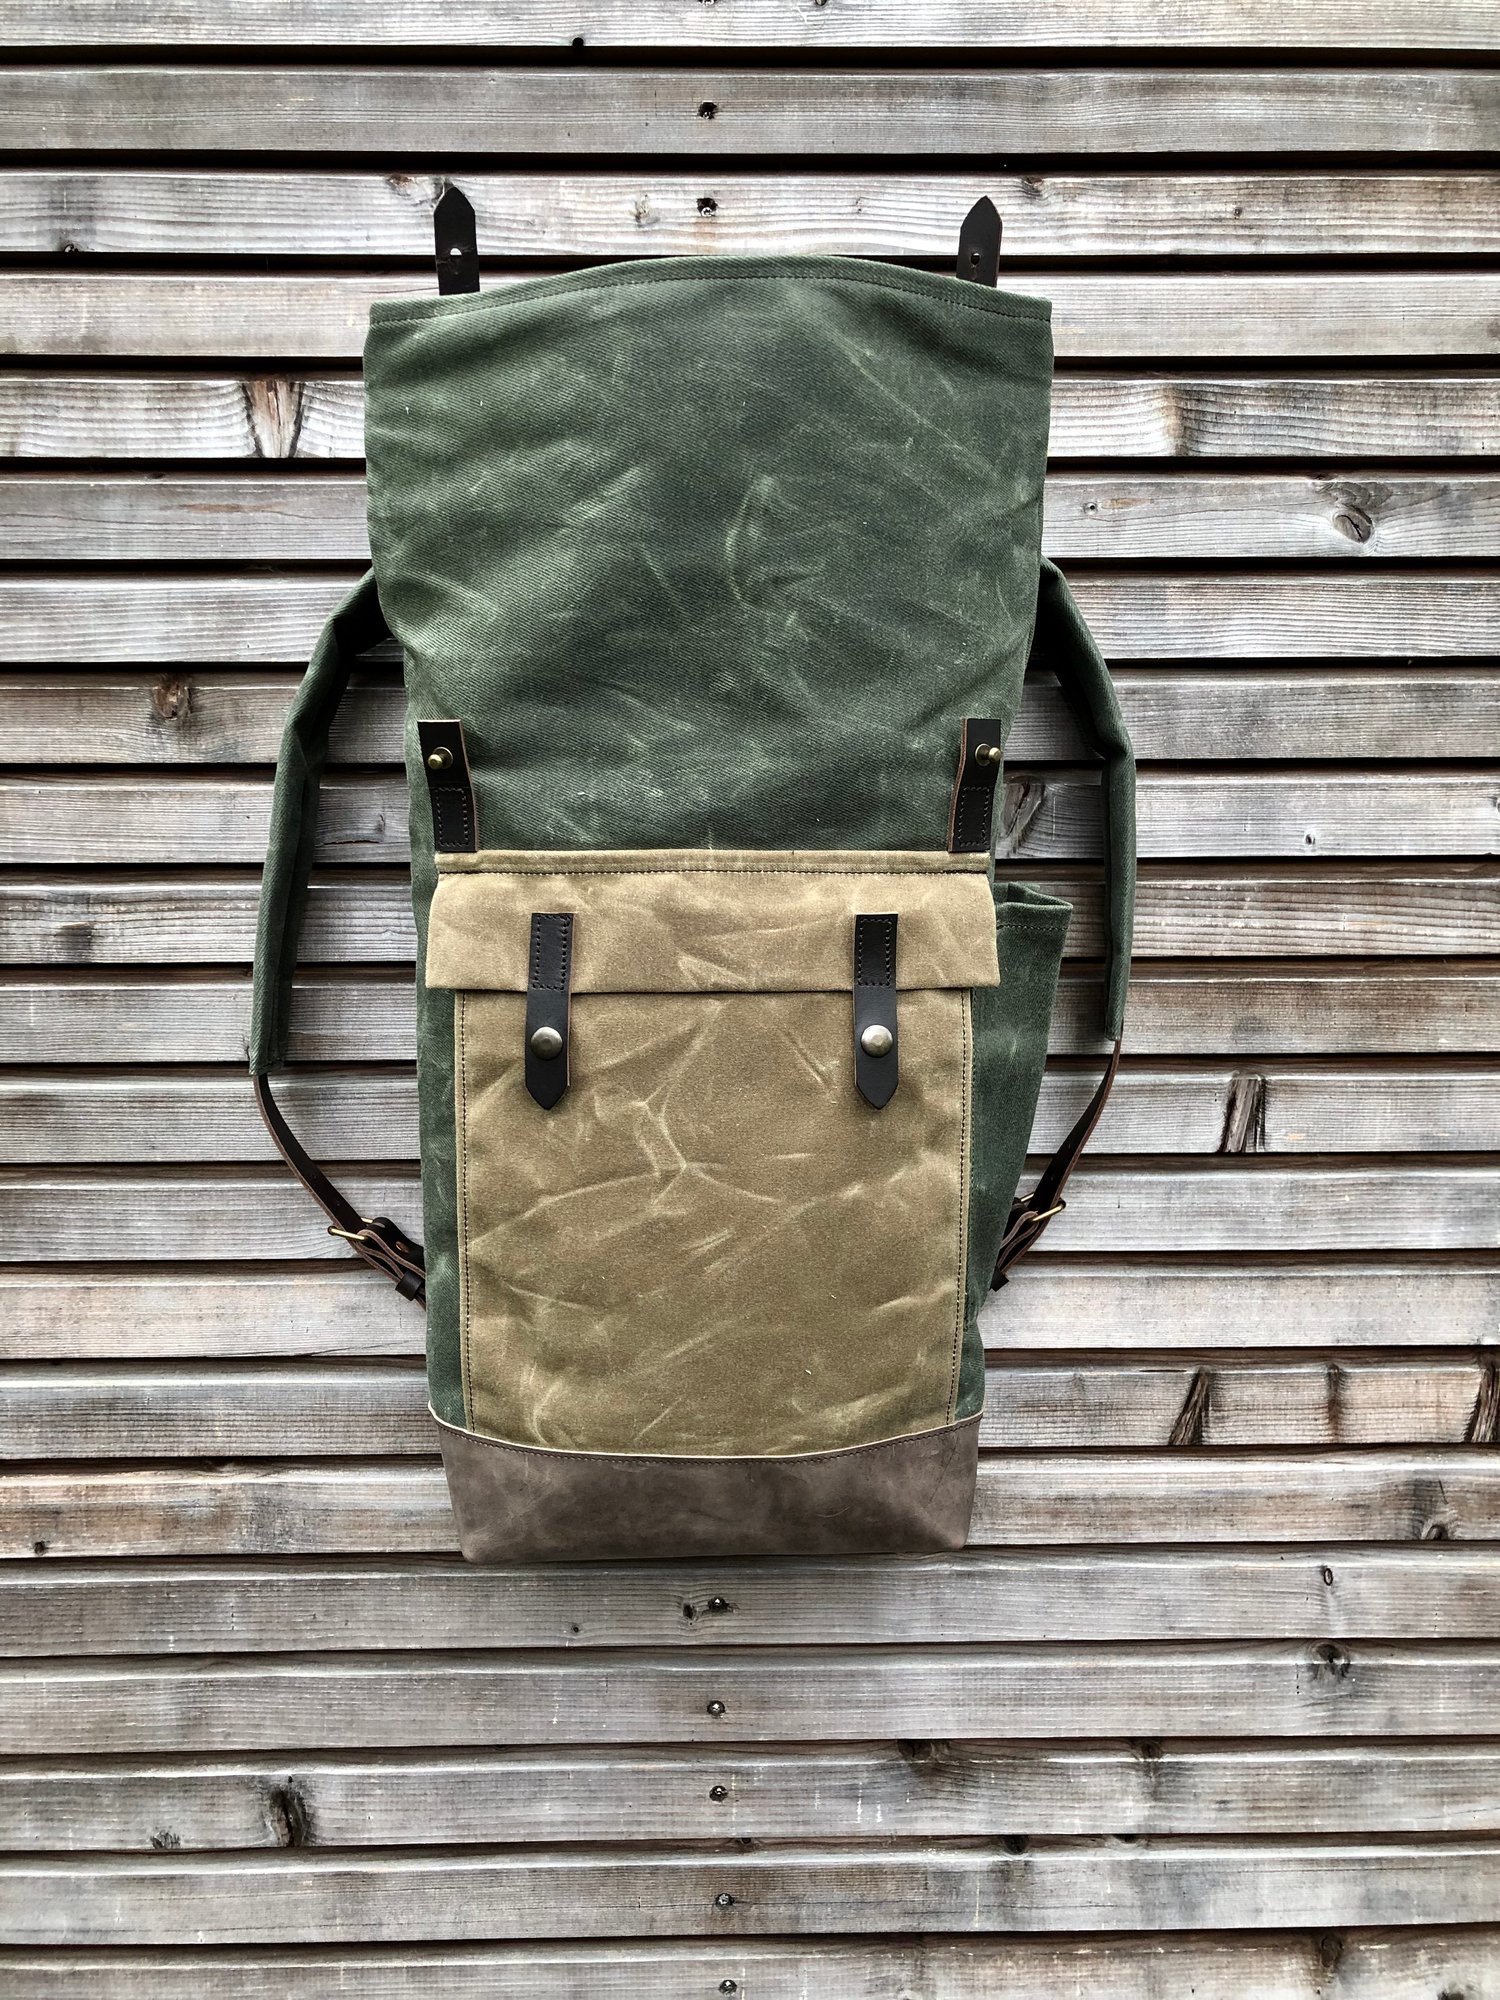 Image of Waxed canvas leather Backpack medium size / Commuter backpack / Hipster Backpack with roll up top an